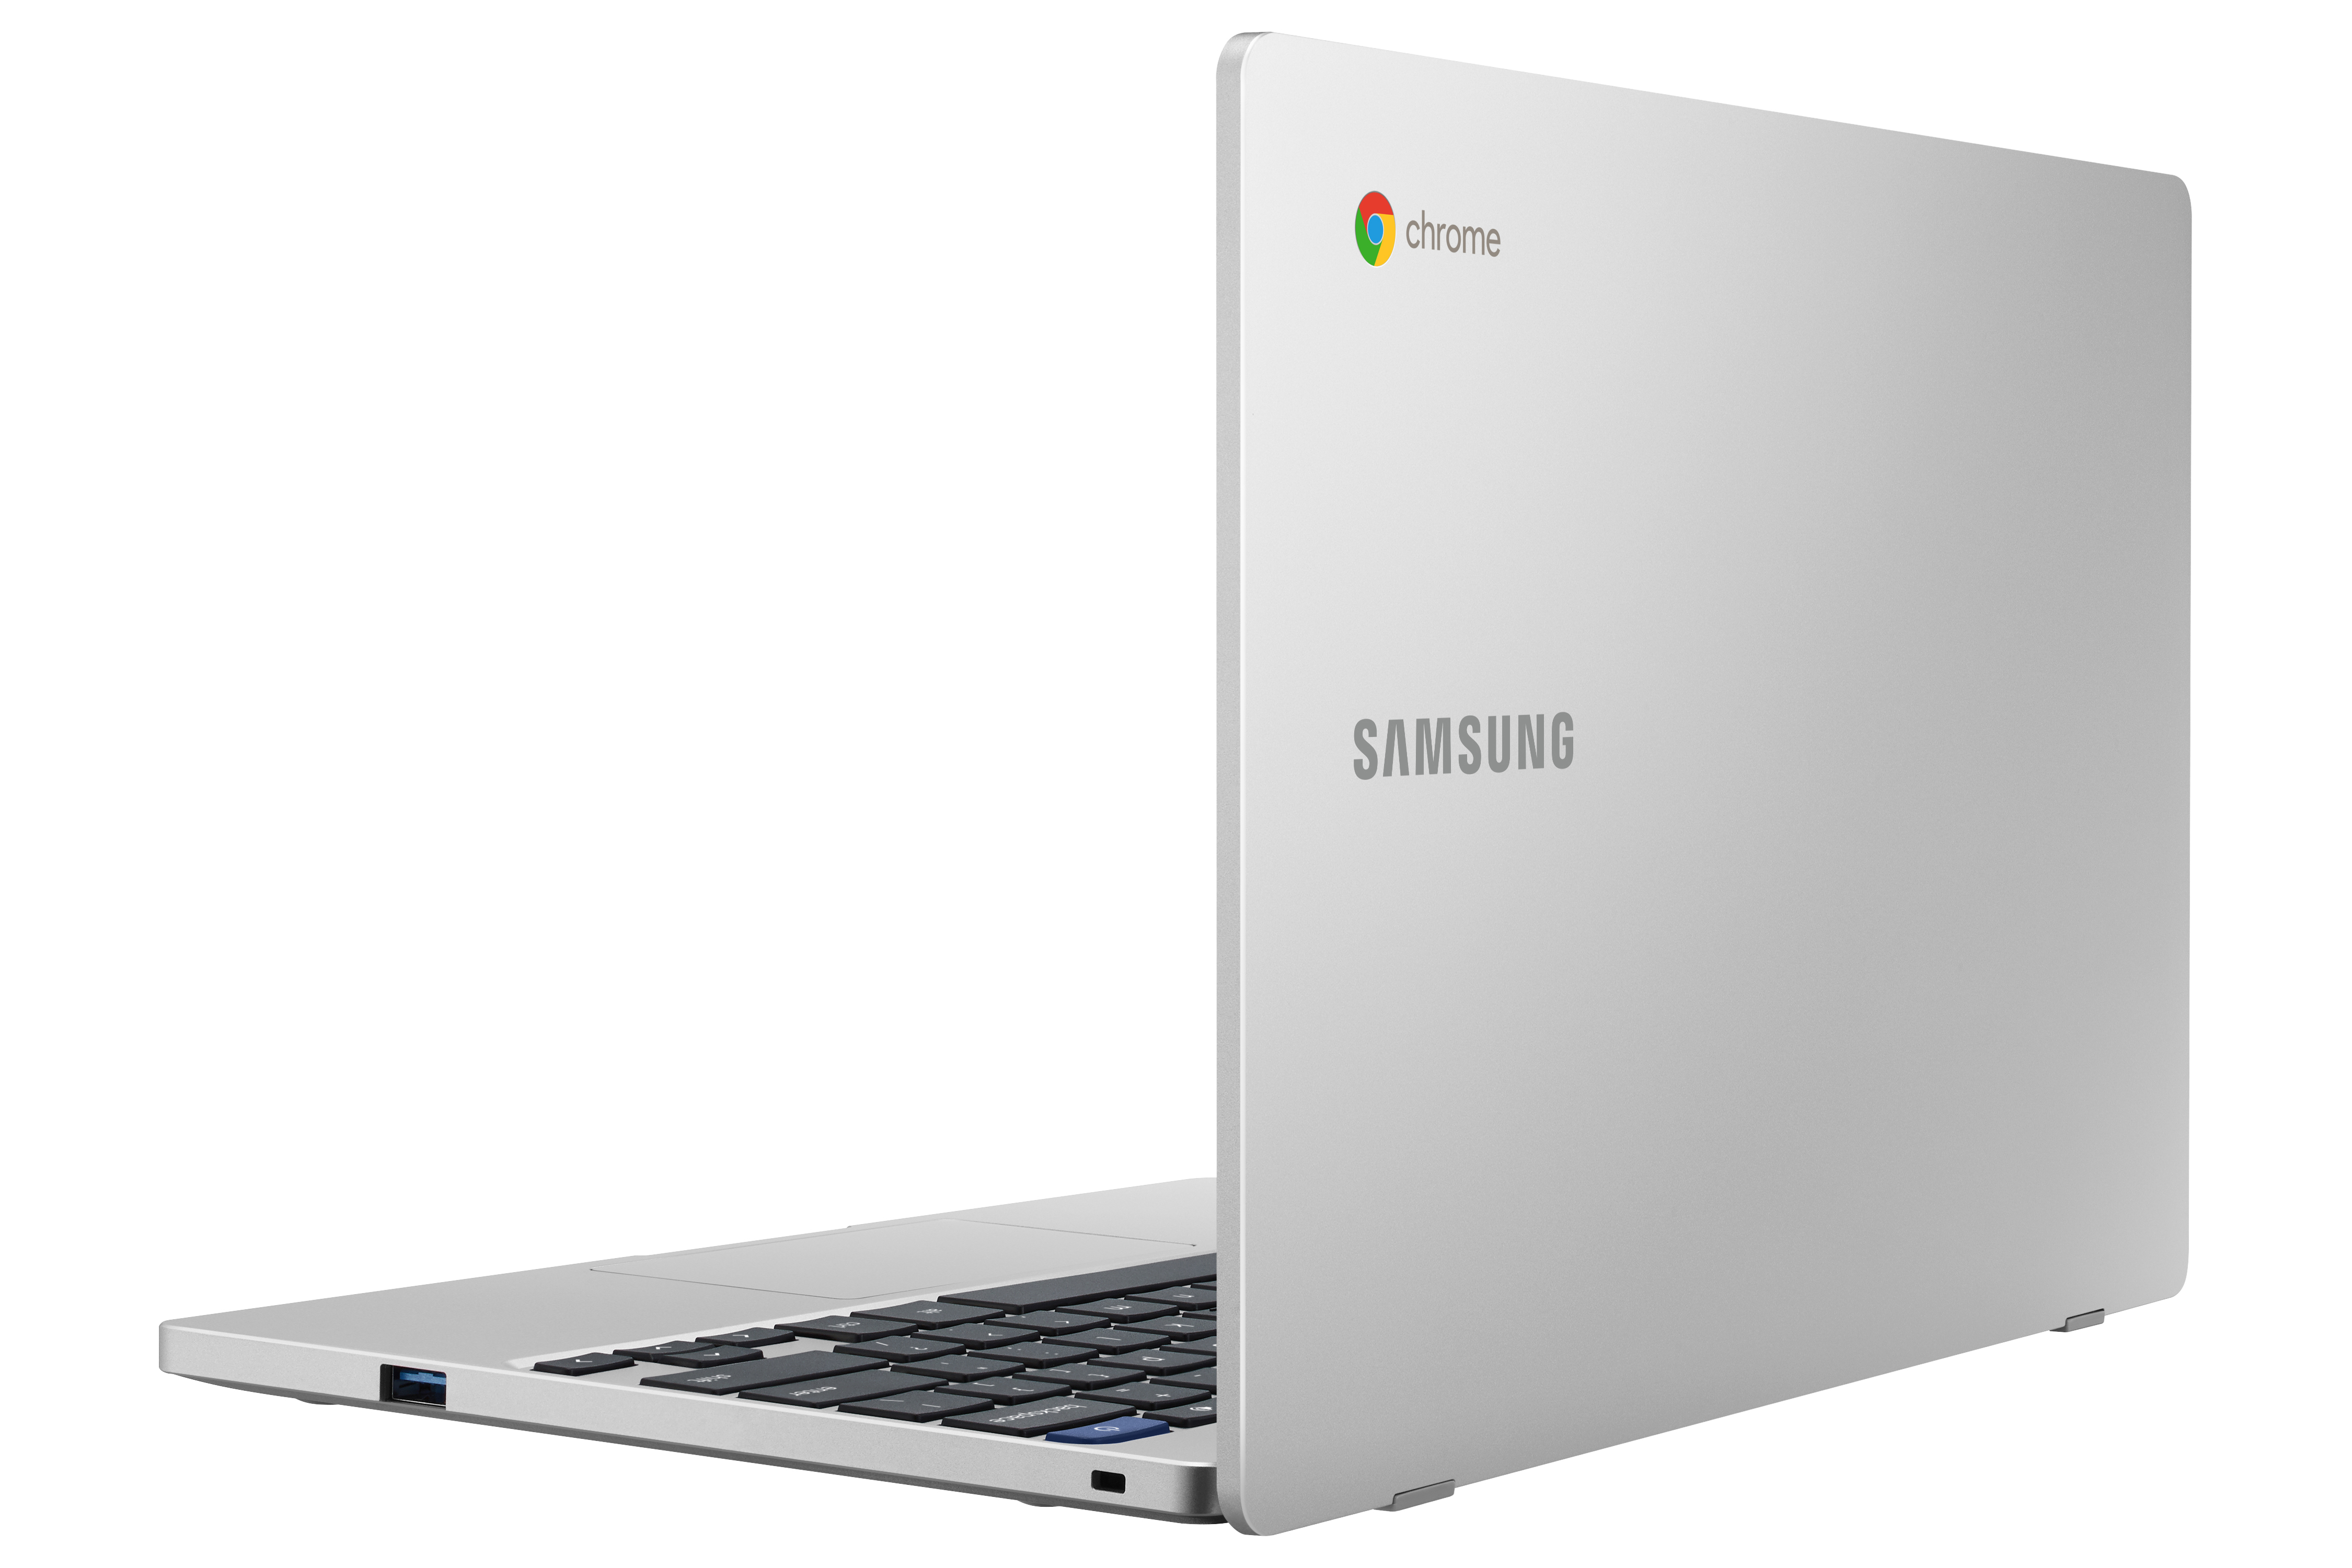 Samsung Chromebook 4 series goes official from 229 9to5Google